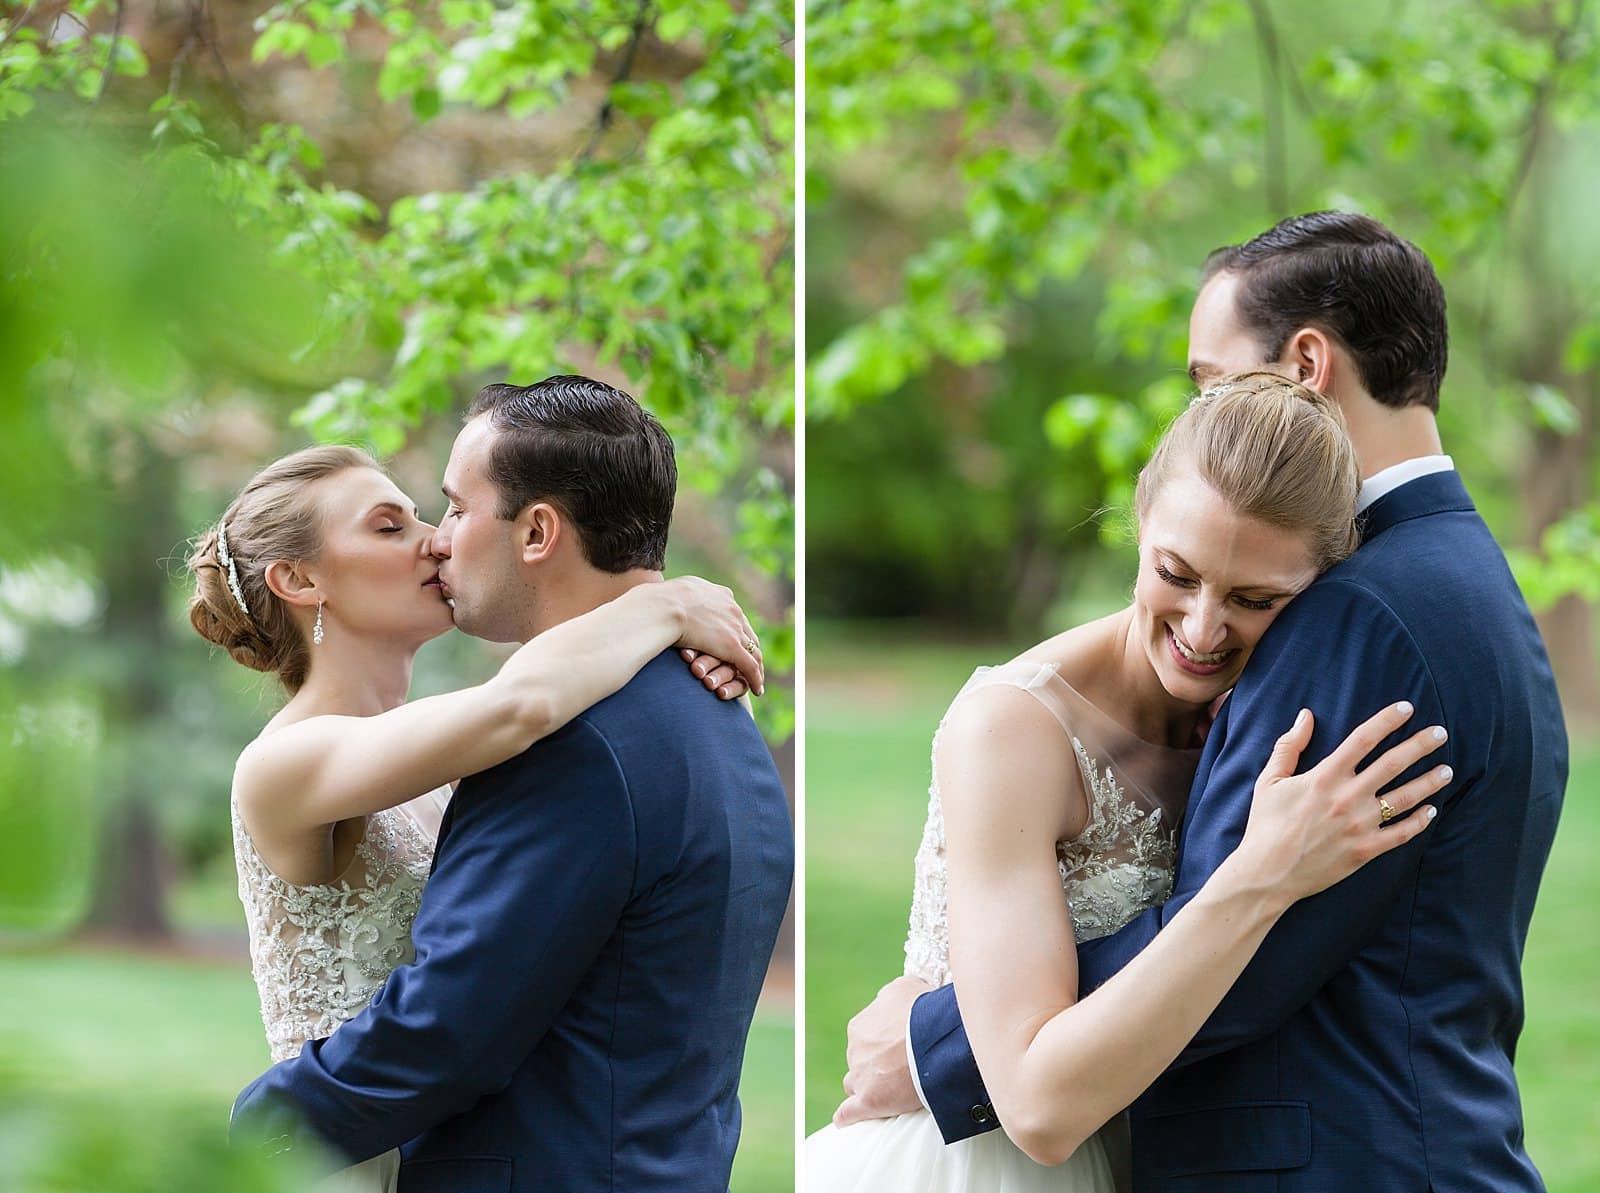 Intimate wedding portraits, bride and groom kissing and hugging, shot through leaves